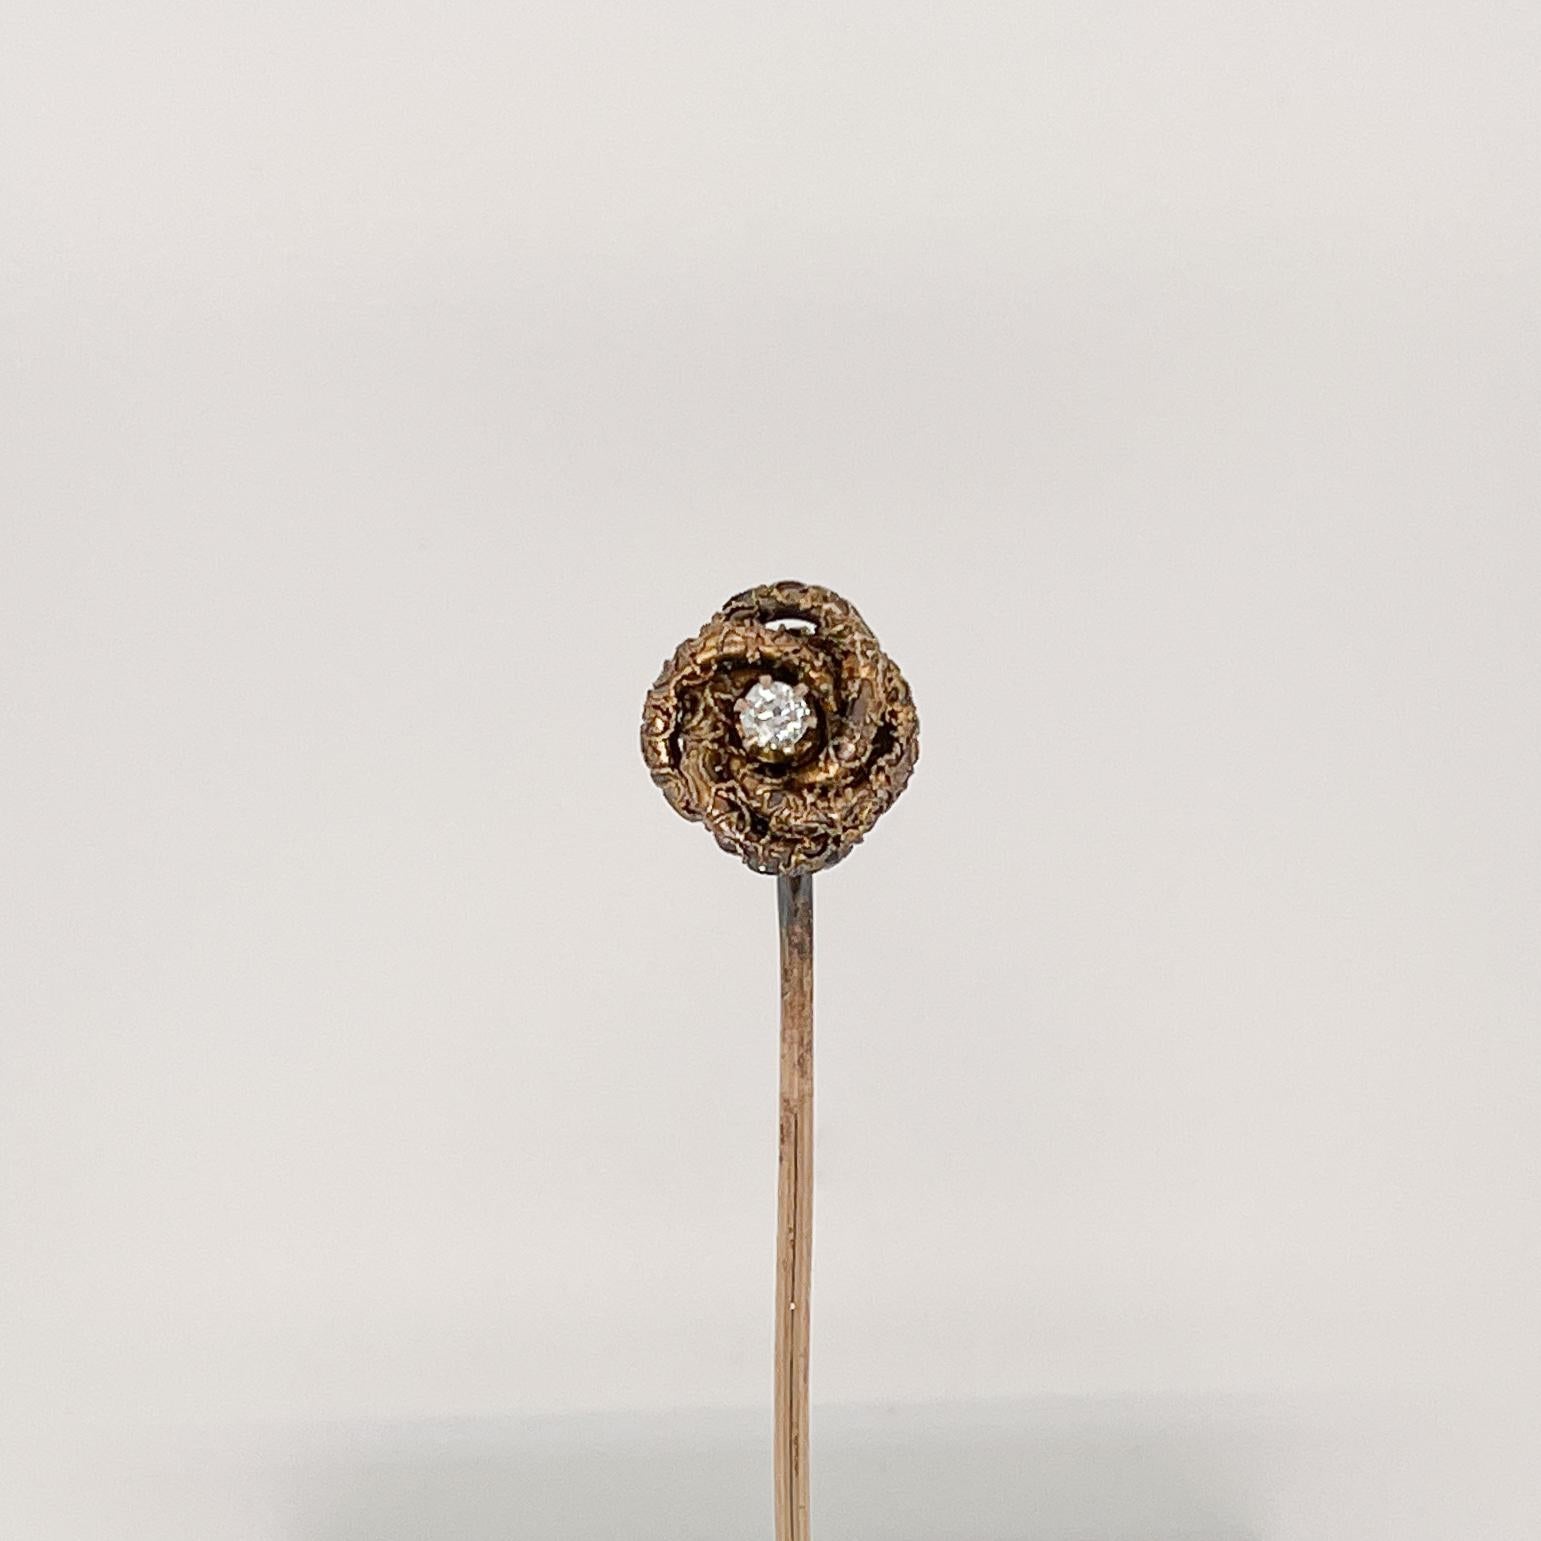 A fine antique Edwardian gold and diamond love knot stickpin.

In 10k gold.

Set with a round white diamond to the center of gold love knot. 

Simply a wonderful stickpin! 

Date:
Early 20th Century

Overall Condition:
It is in overall good,